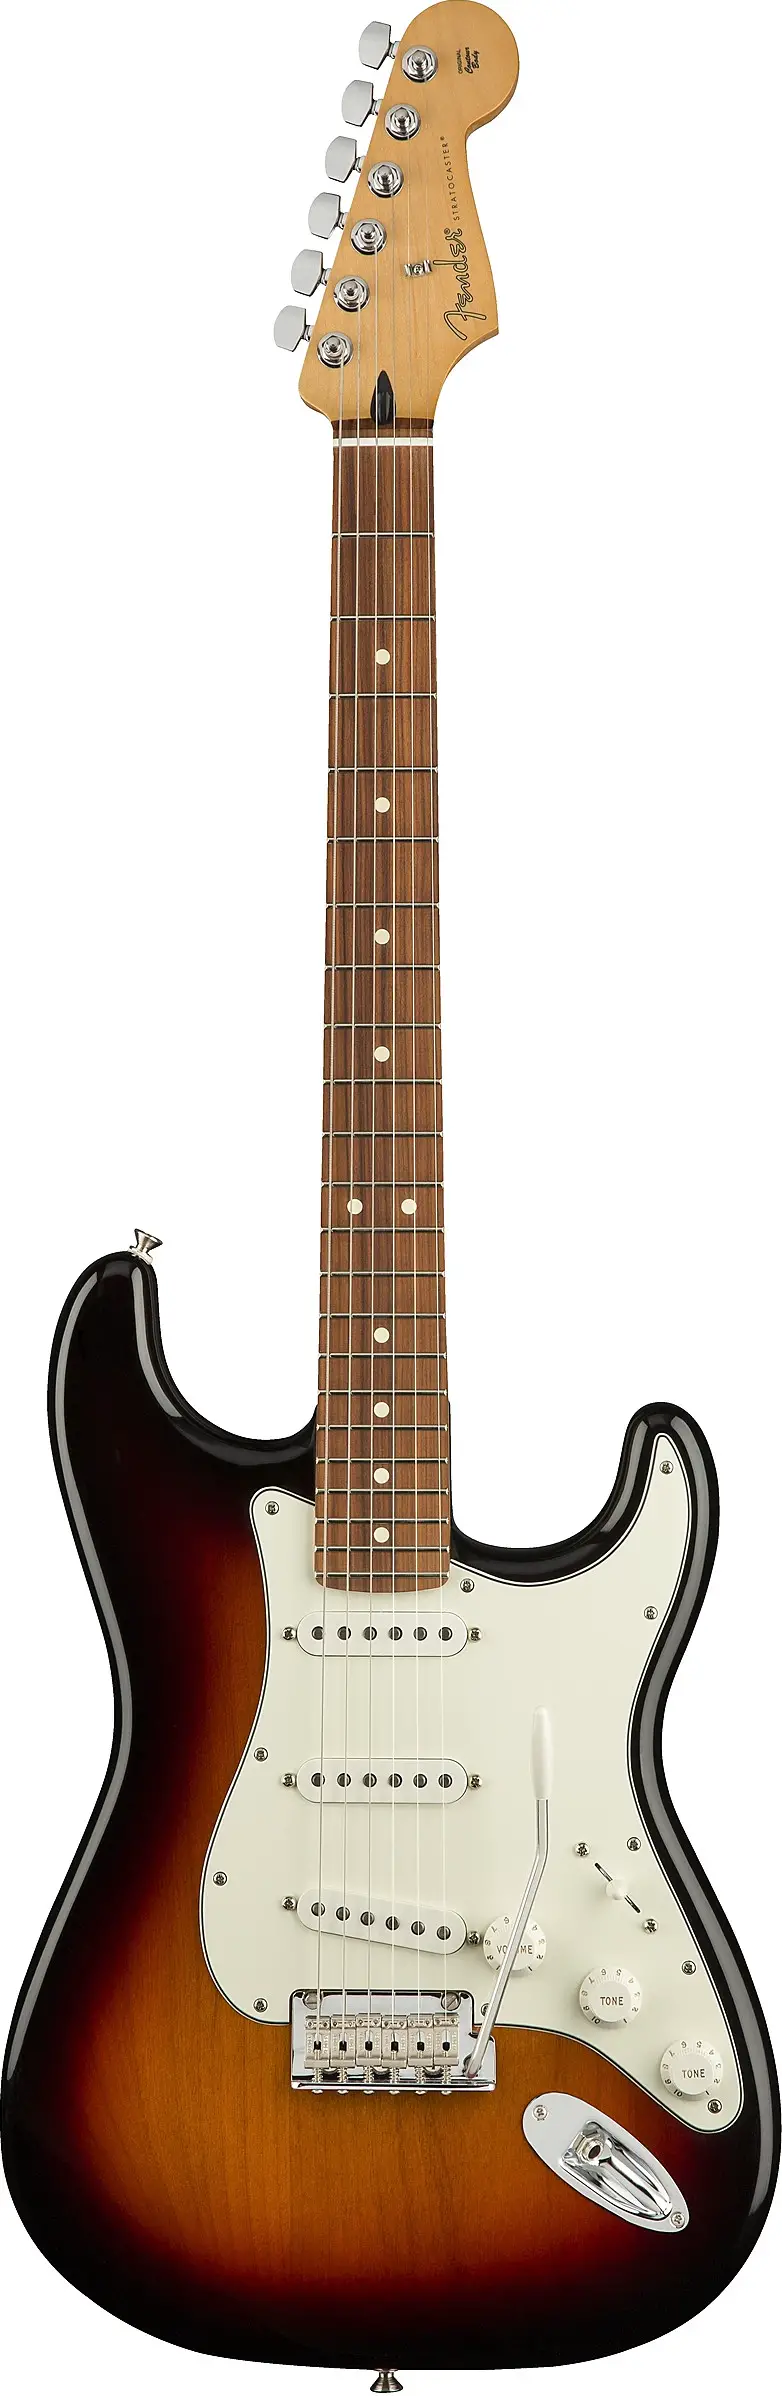 Player Stratocaster� by Fender